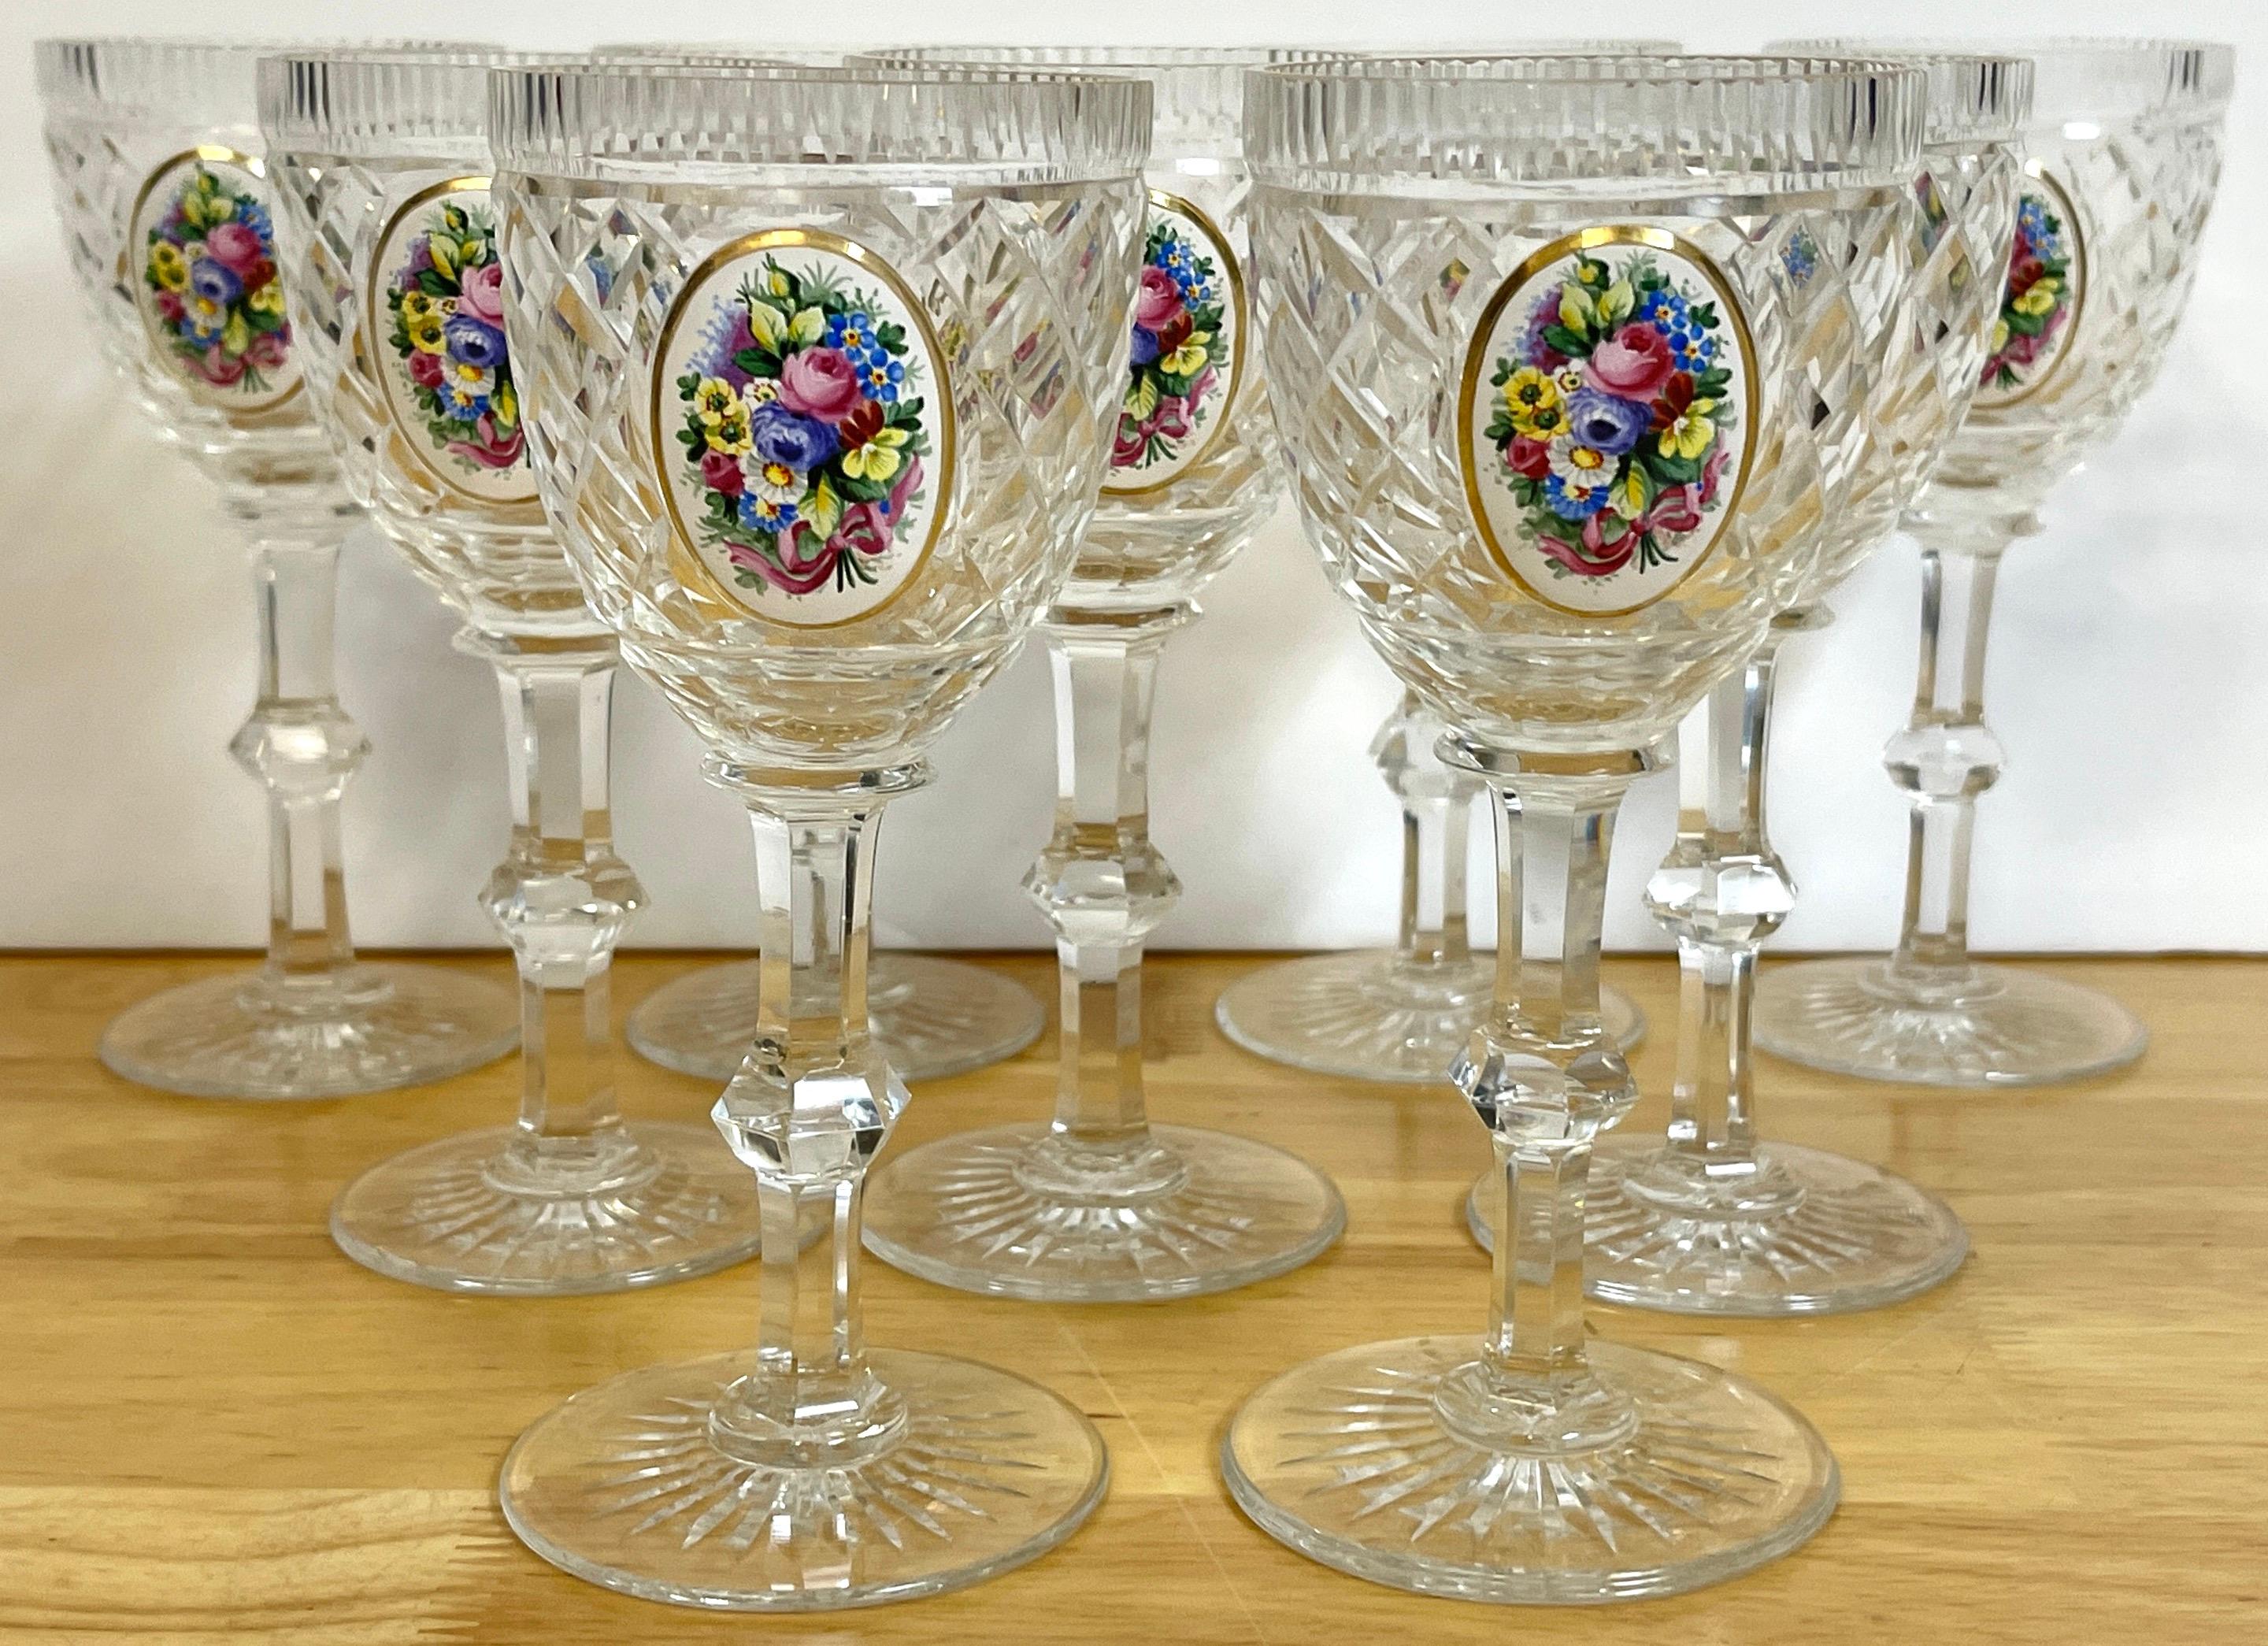 8 Exquisite Moser floral enameled cut to clear enamel glasses
Each one with a fine cross-hatched colorless crystal stems, with an oval enameled floral bouquet. 
Unmarked.
Measures: 6 height x 2.75.
 